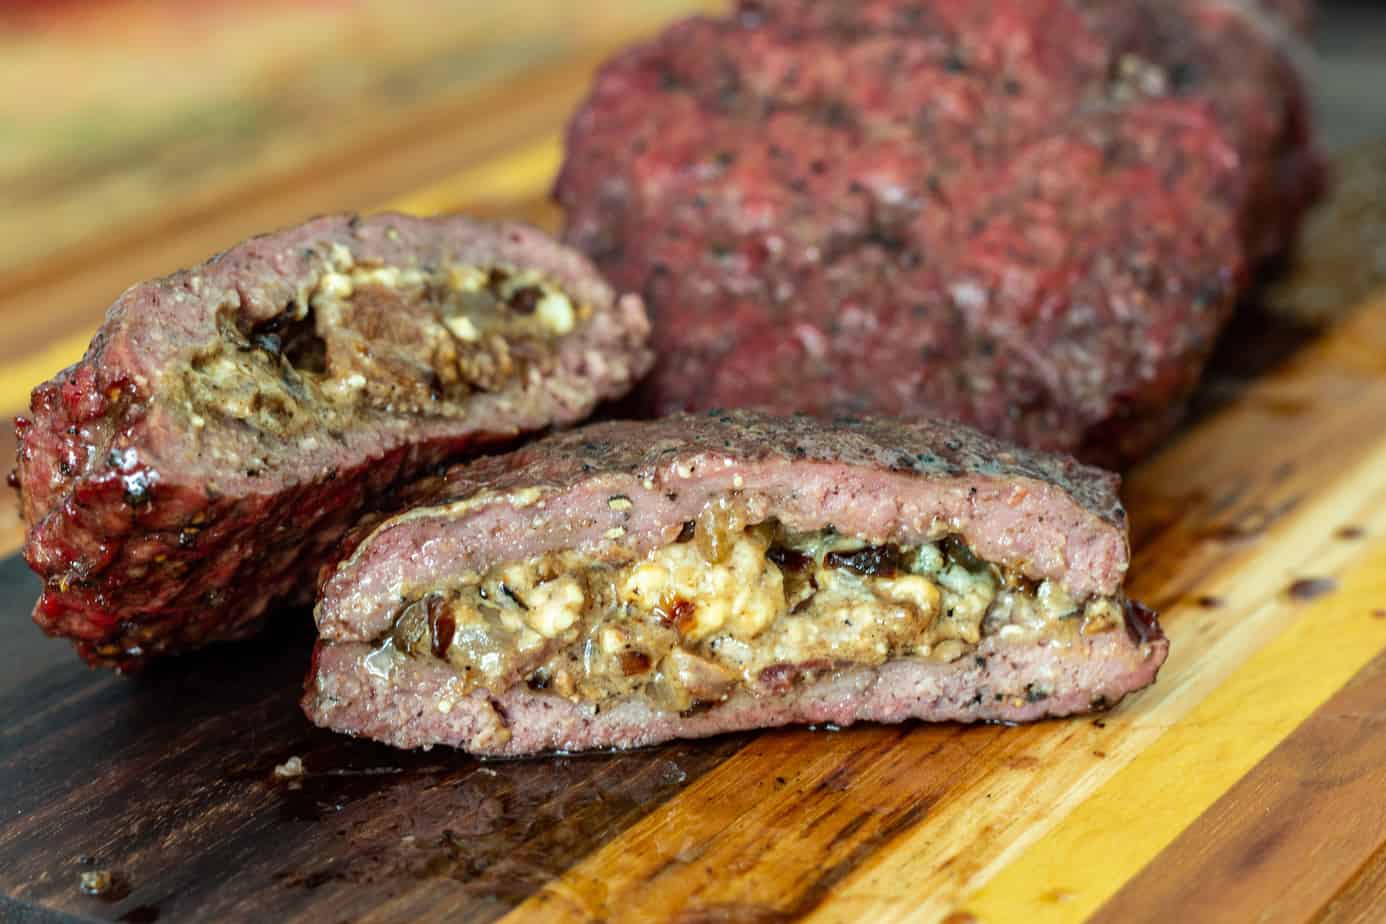 Stuffed juicy lucy burger on a wooden cutting board.